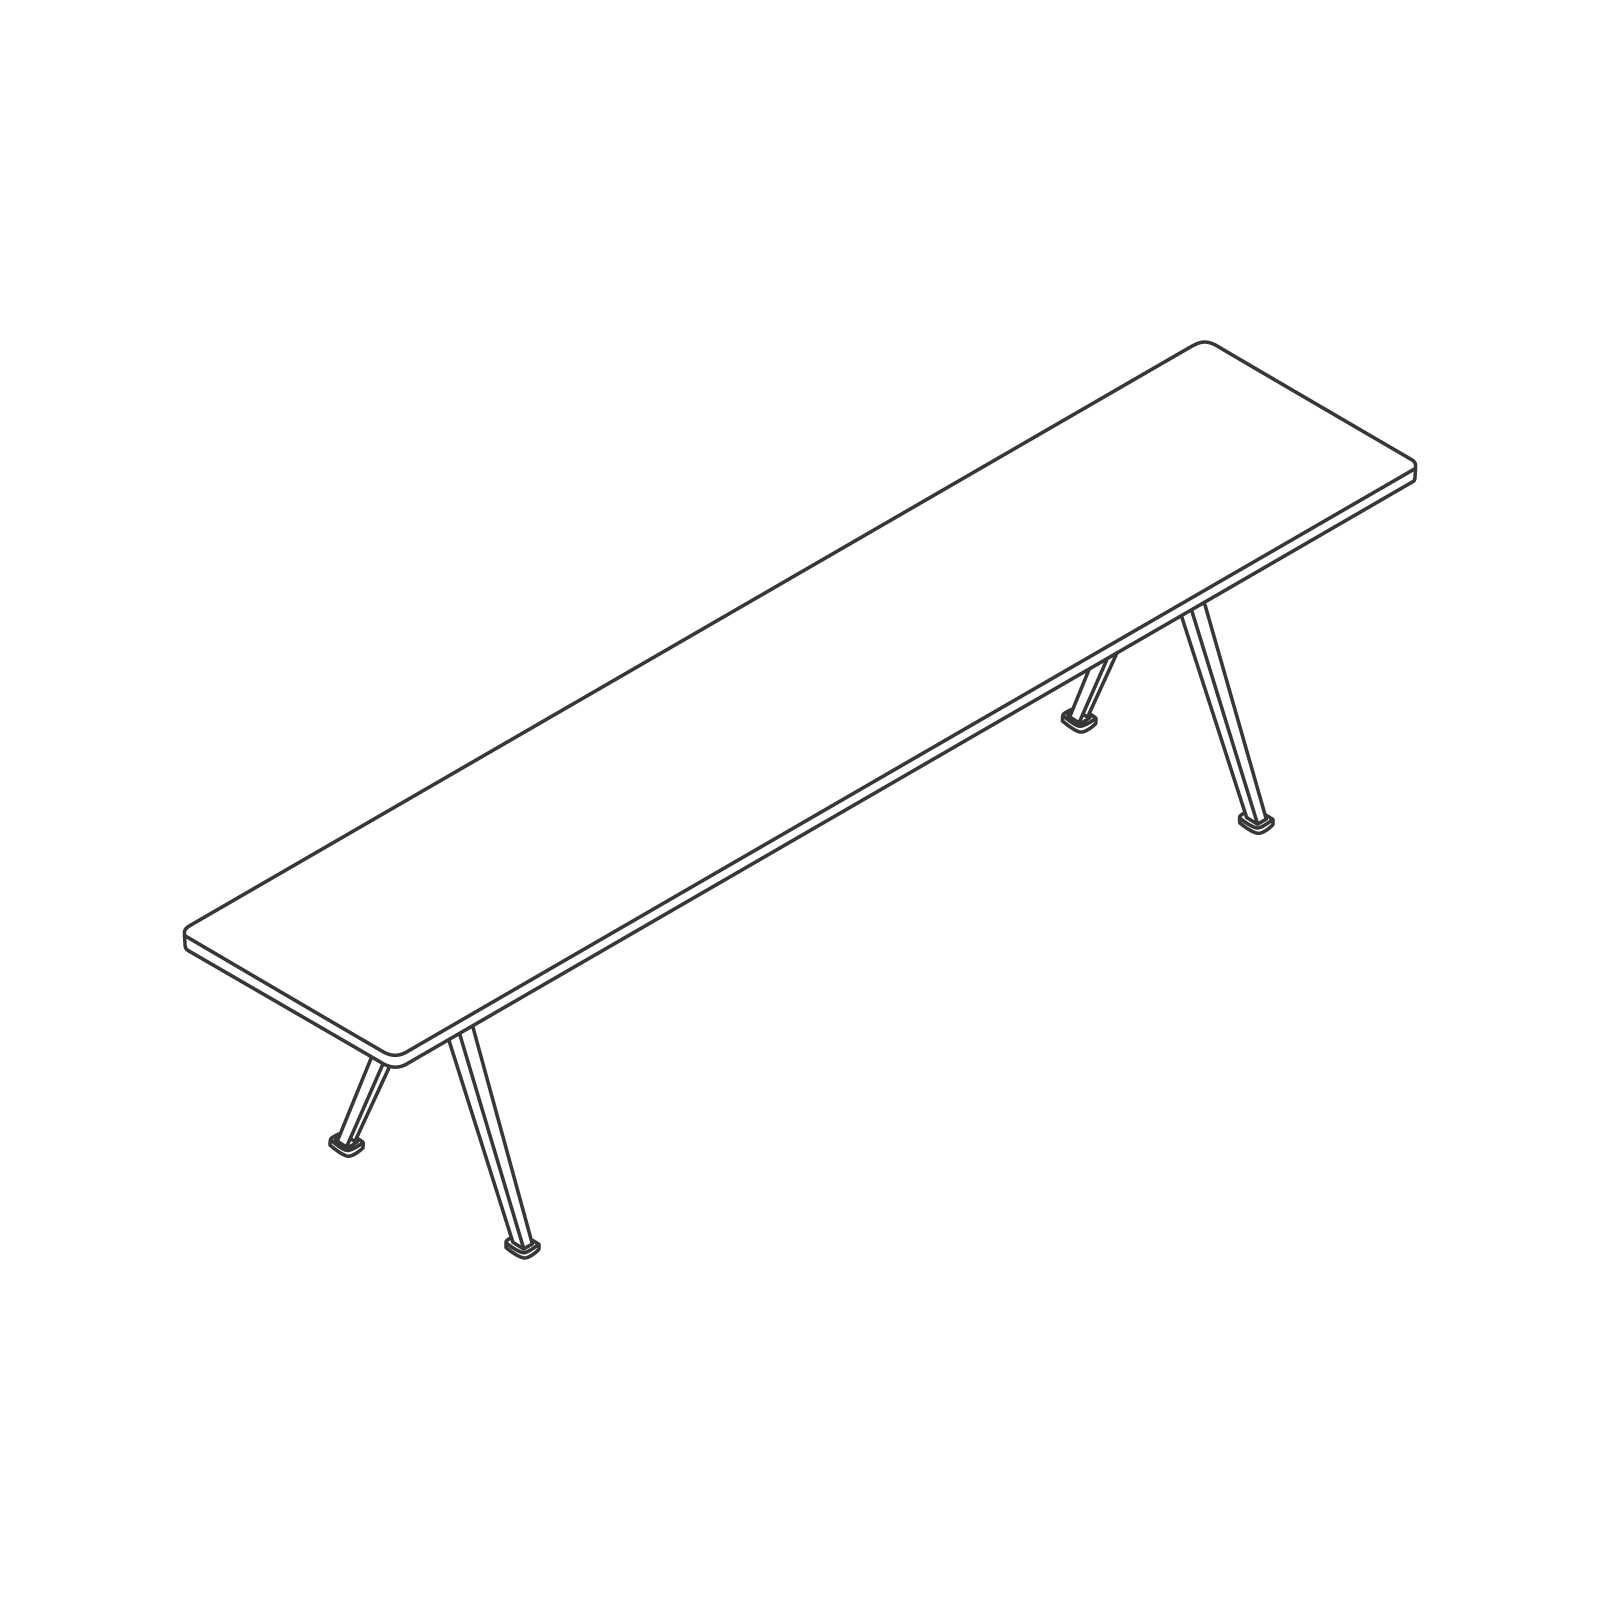 A line drawing - Pyramid Bench–With Overhang